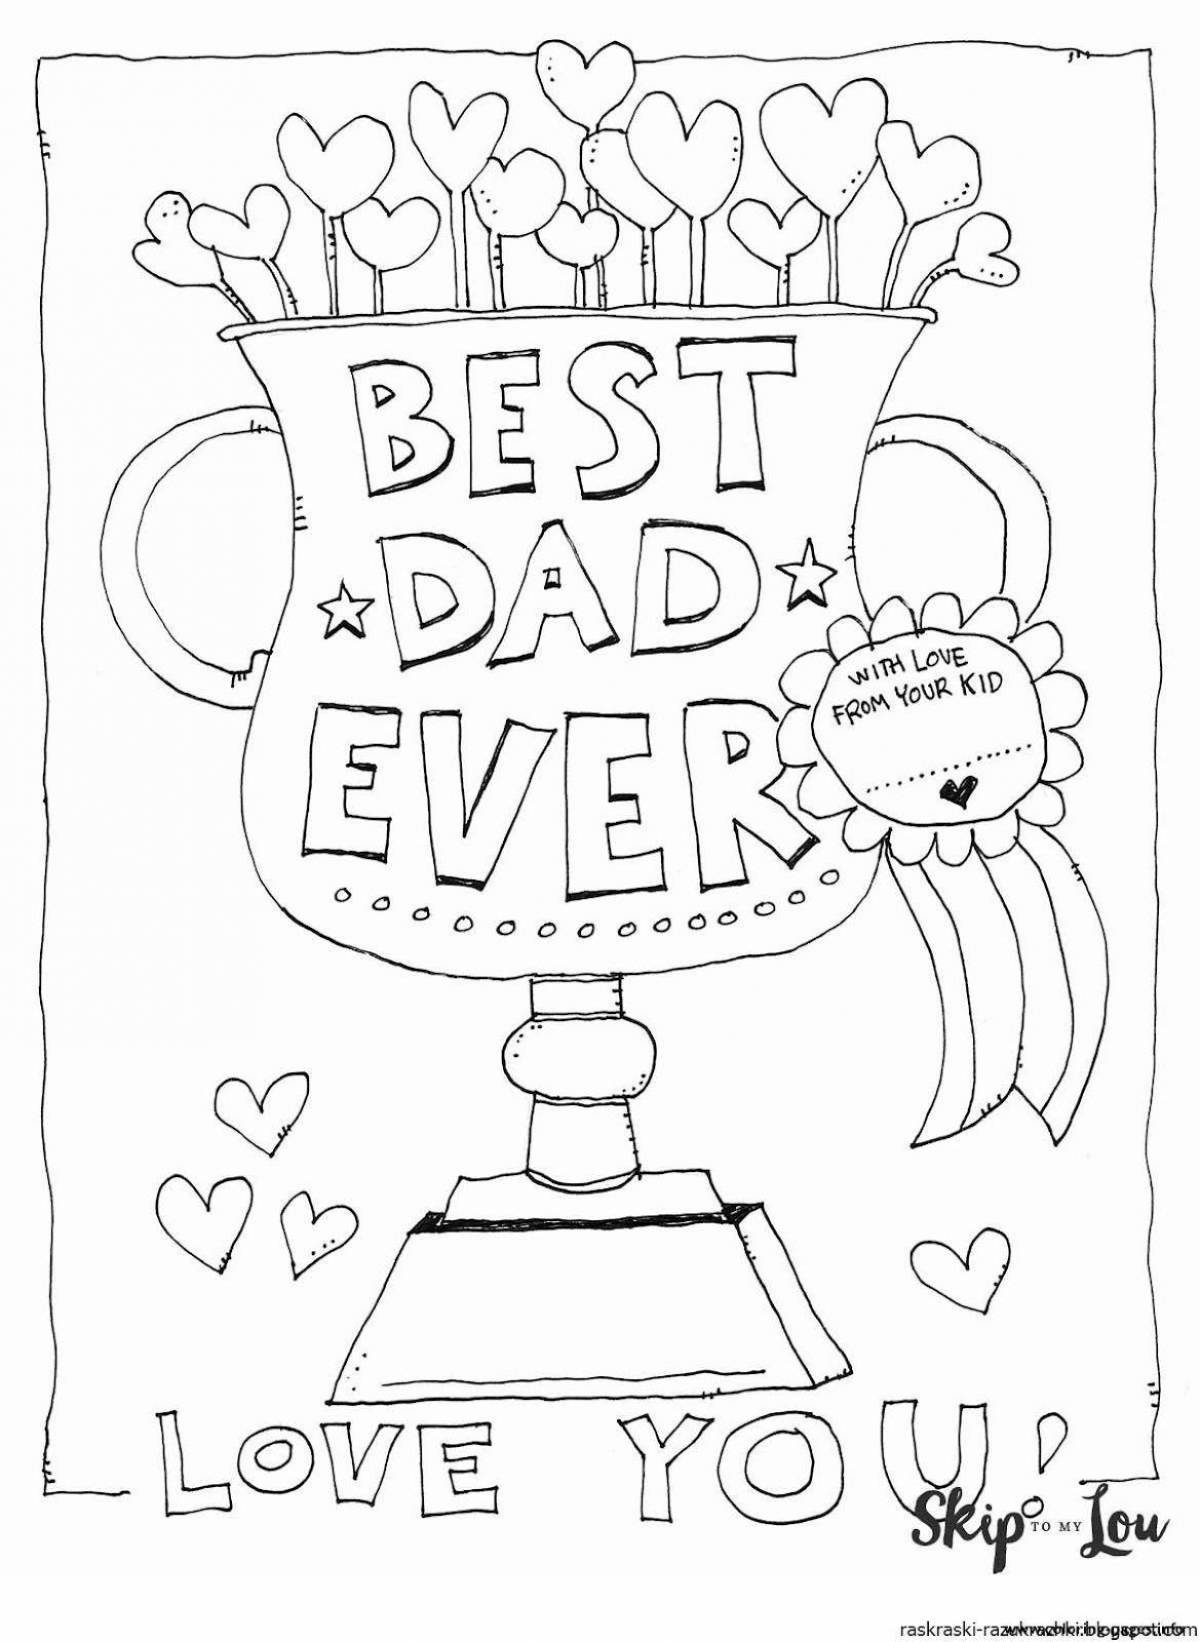 Dad for birthday from daughter #2